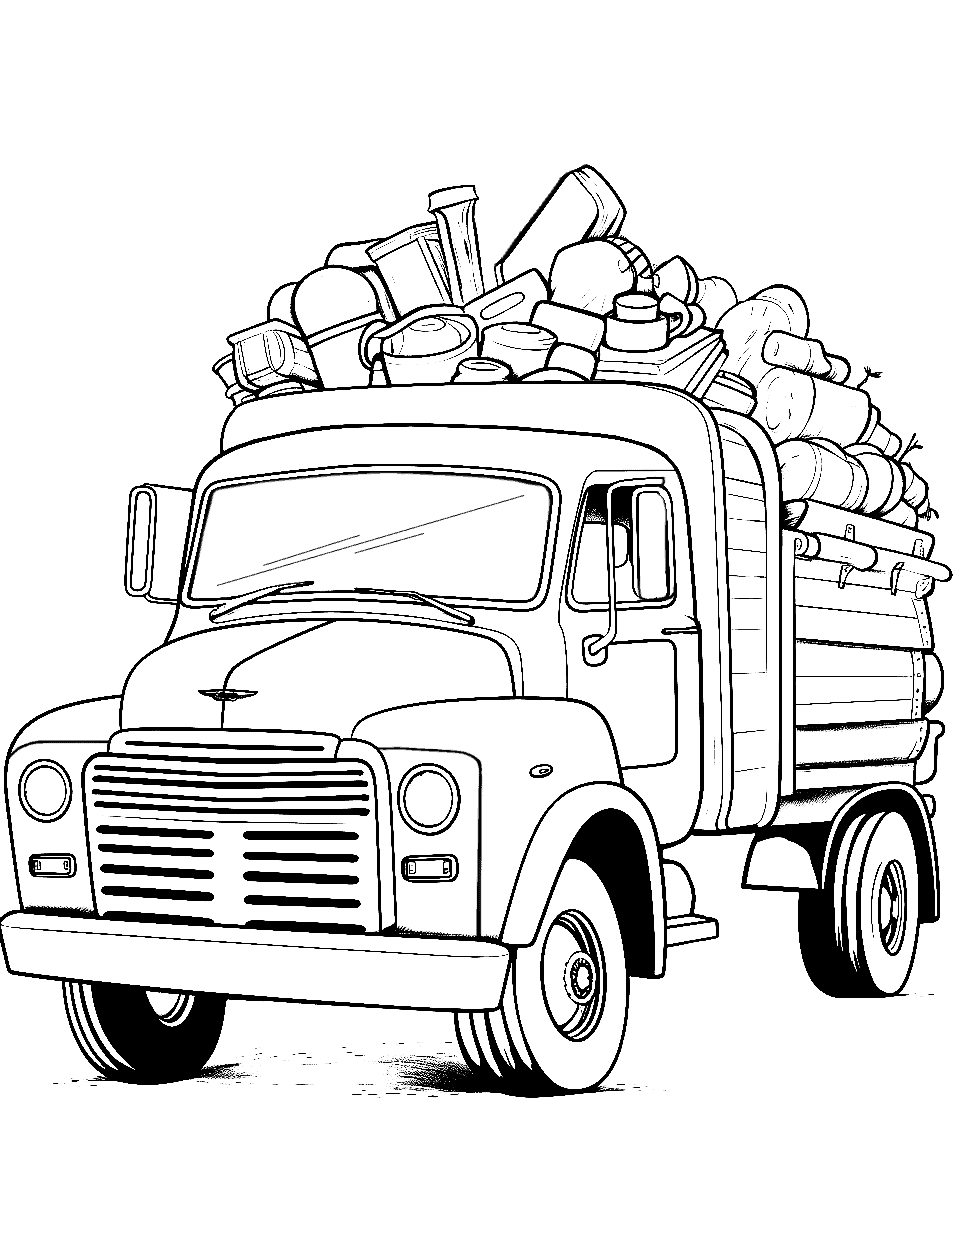 Volunteers’ Pickup Truck Coloring Page - A pickup truck filled with supplies.